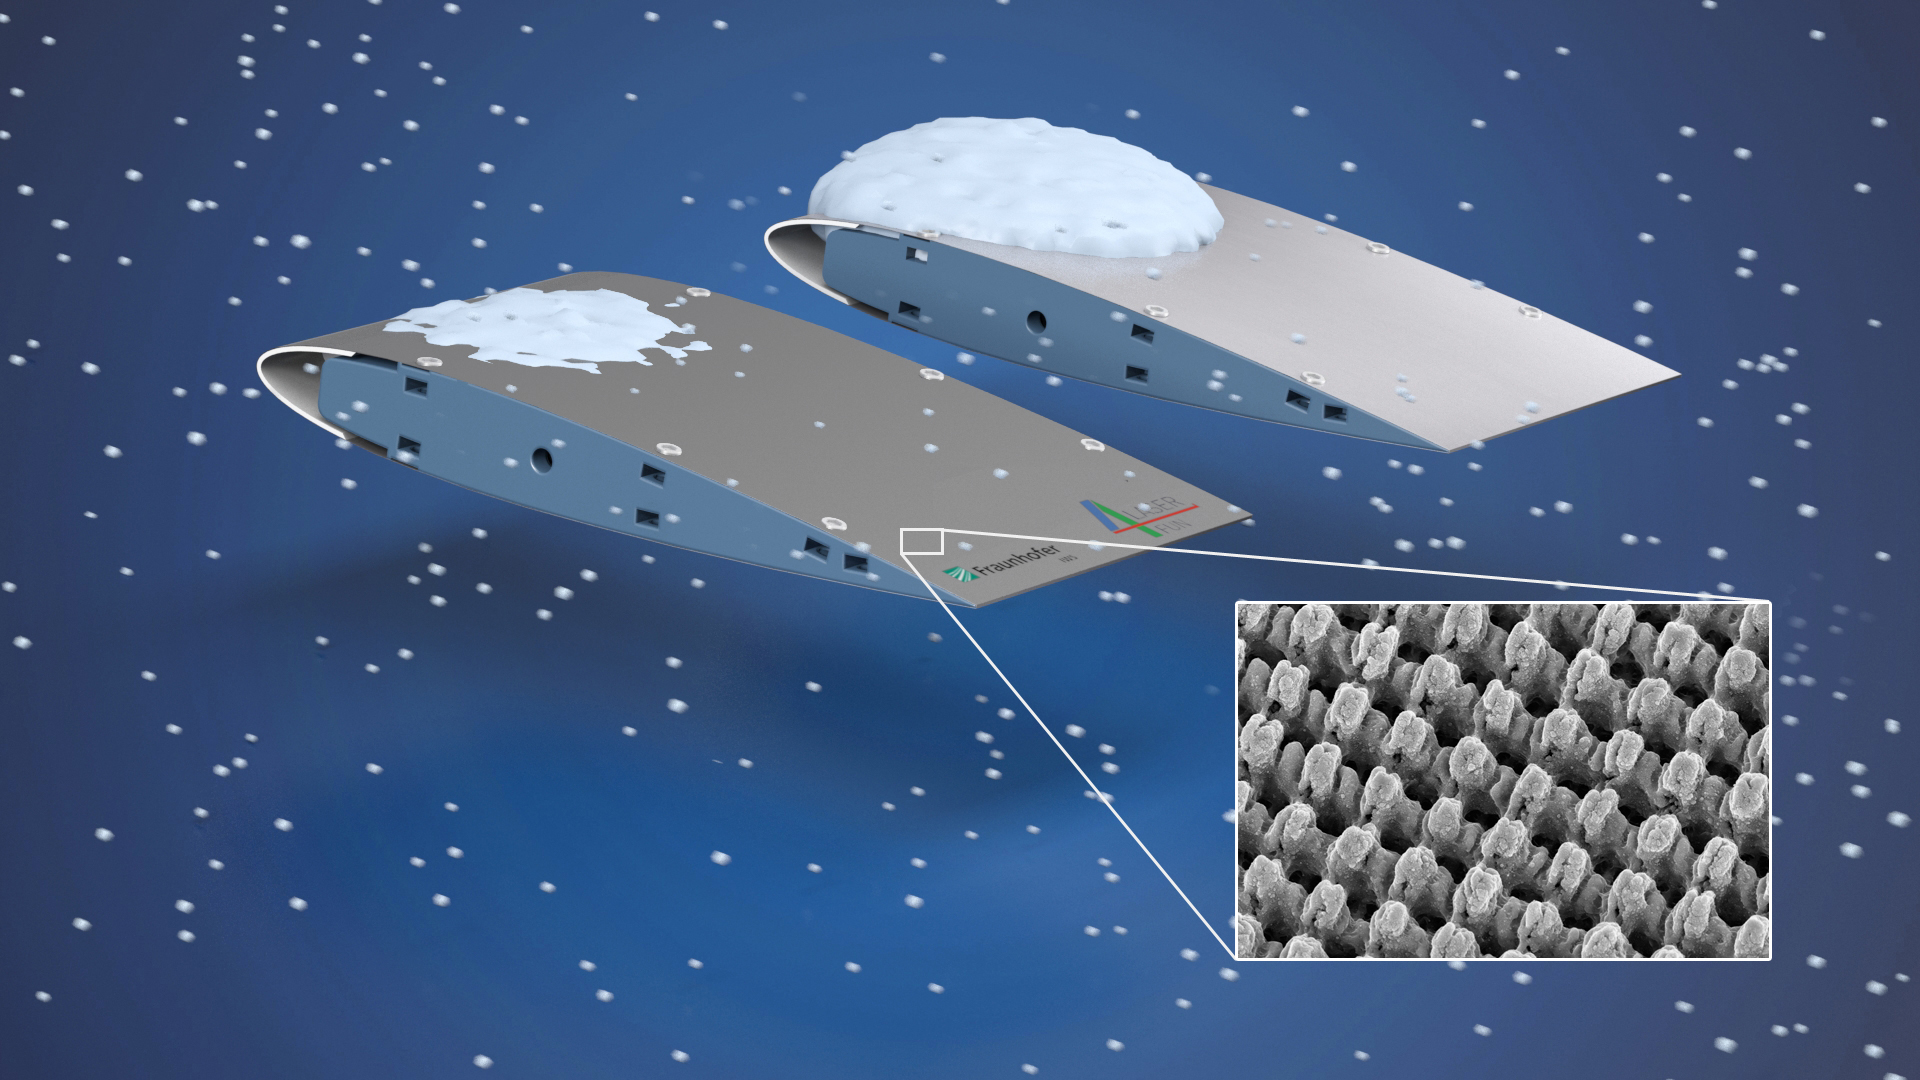 Direct Laser Interference Patterning (DLIP) can create complex, meandering surface structures on the micron and submicron scale to decrease ice accumulation and accelerate de-icing.